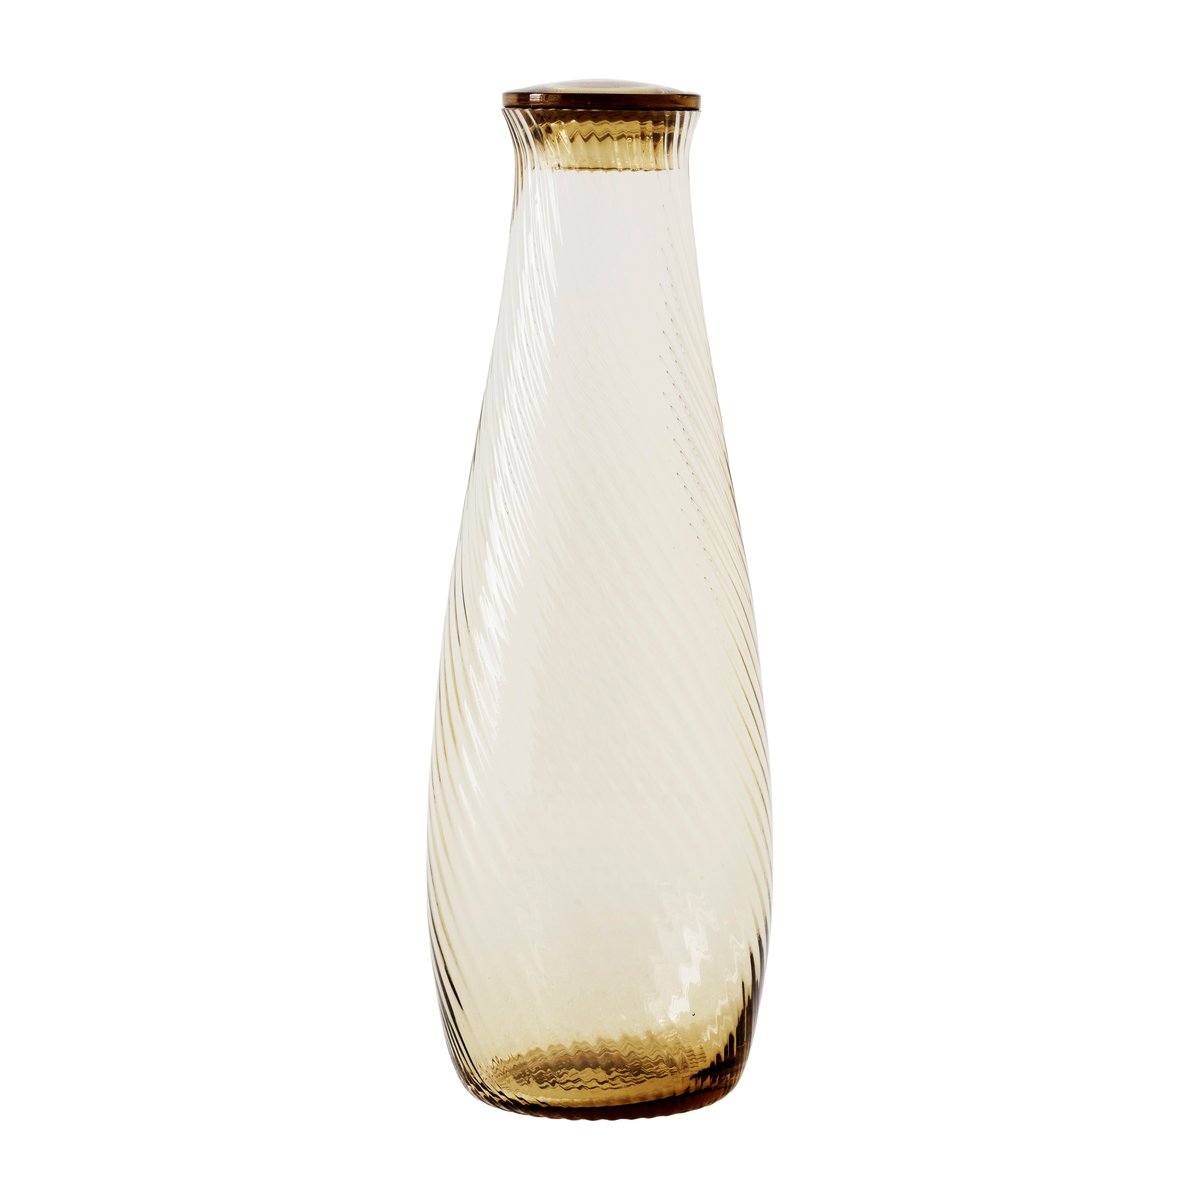 &tradition carafe collect sc62 0,8 l amber